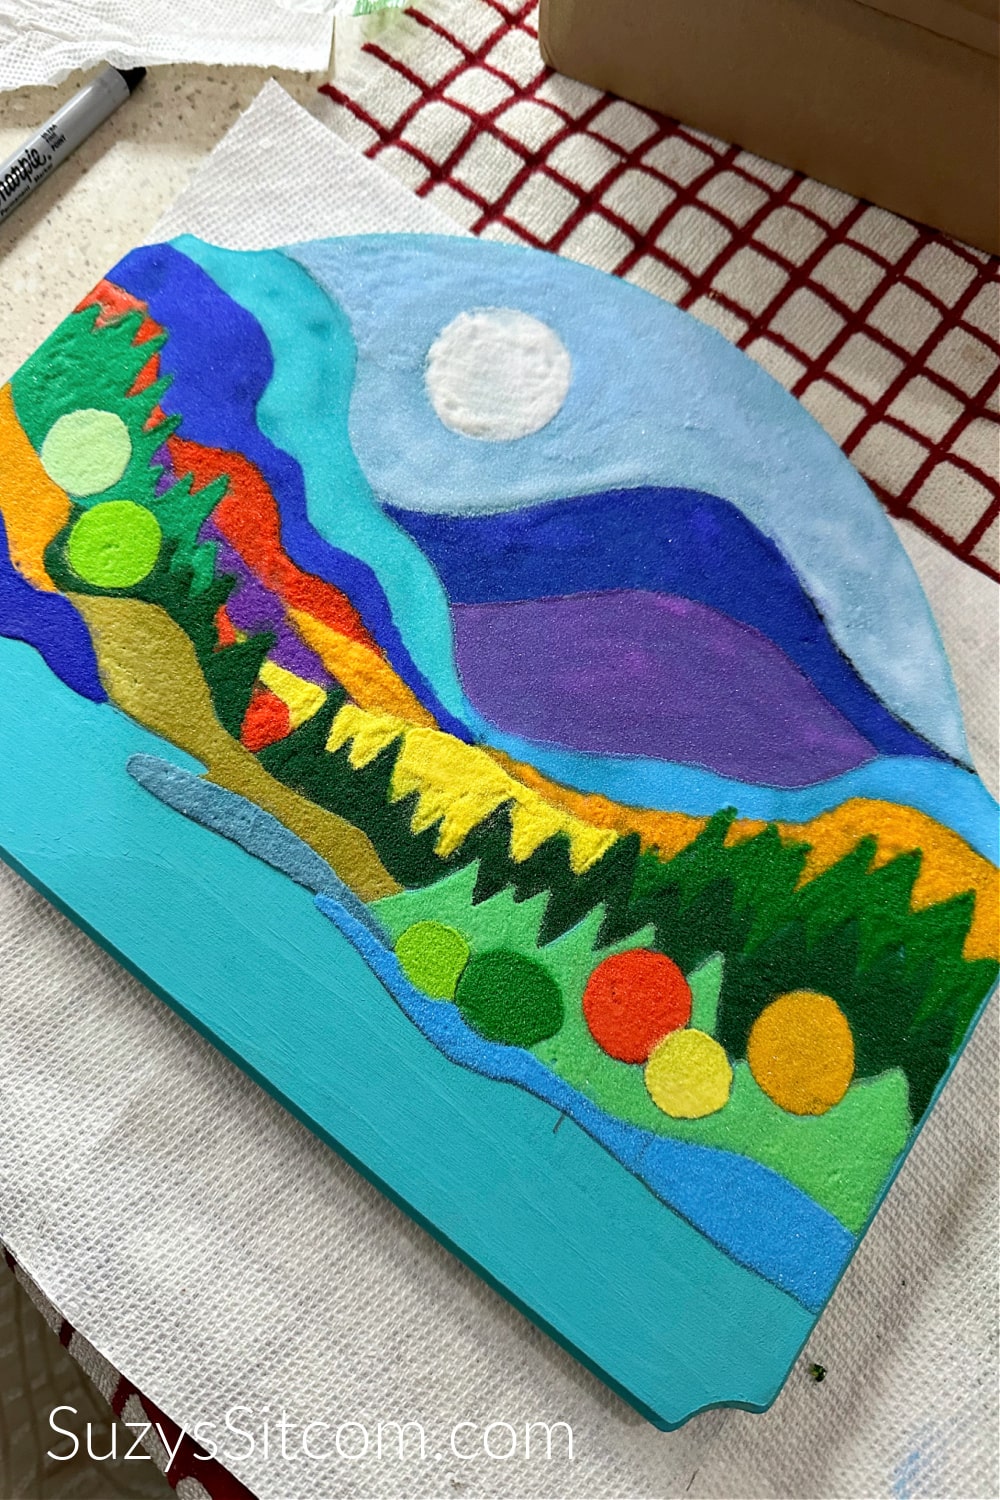 Landscape art with all colors of sand added.